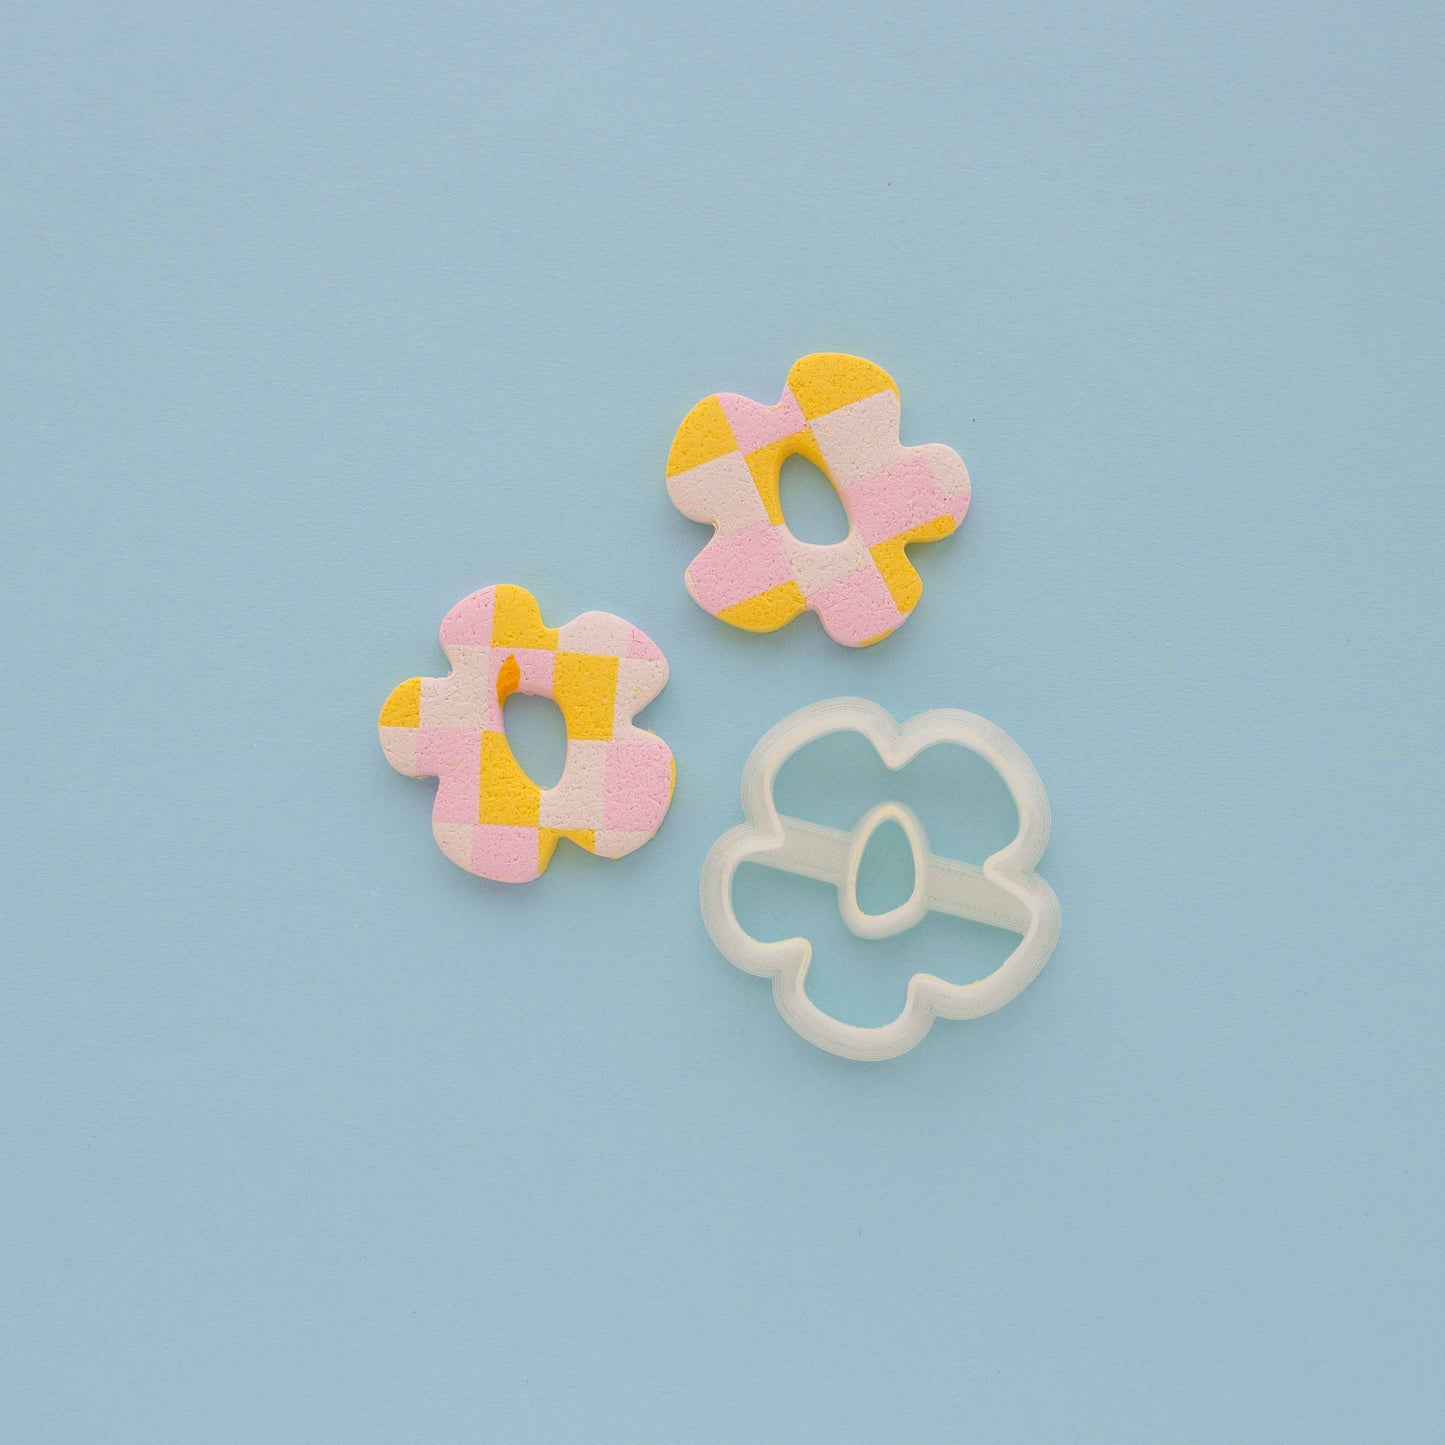 Two small flower abstract earrings and a clay cutter on a light blue background